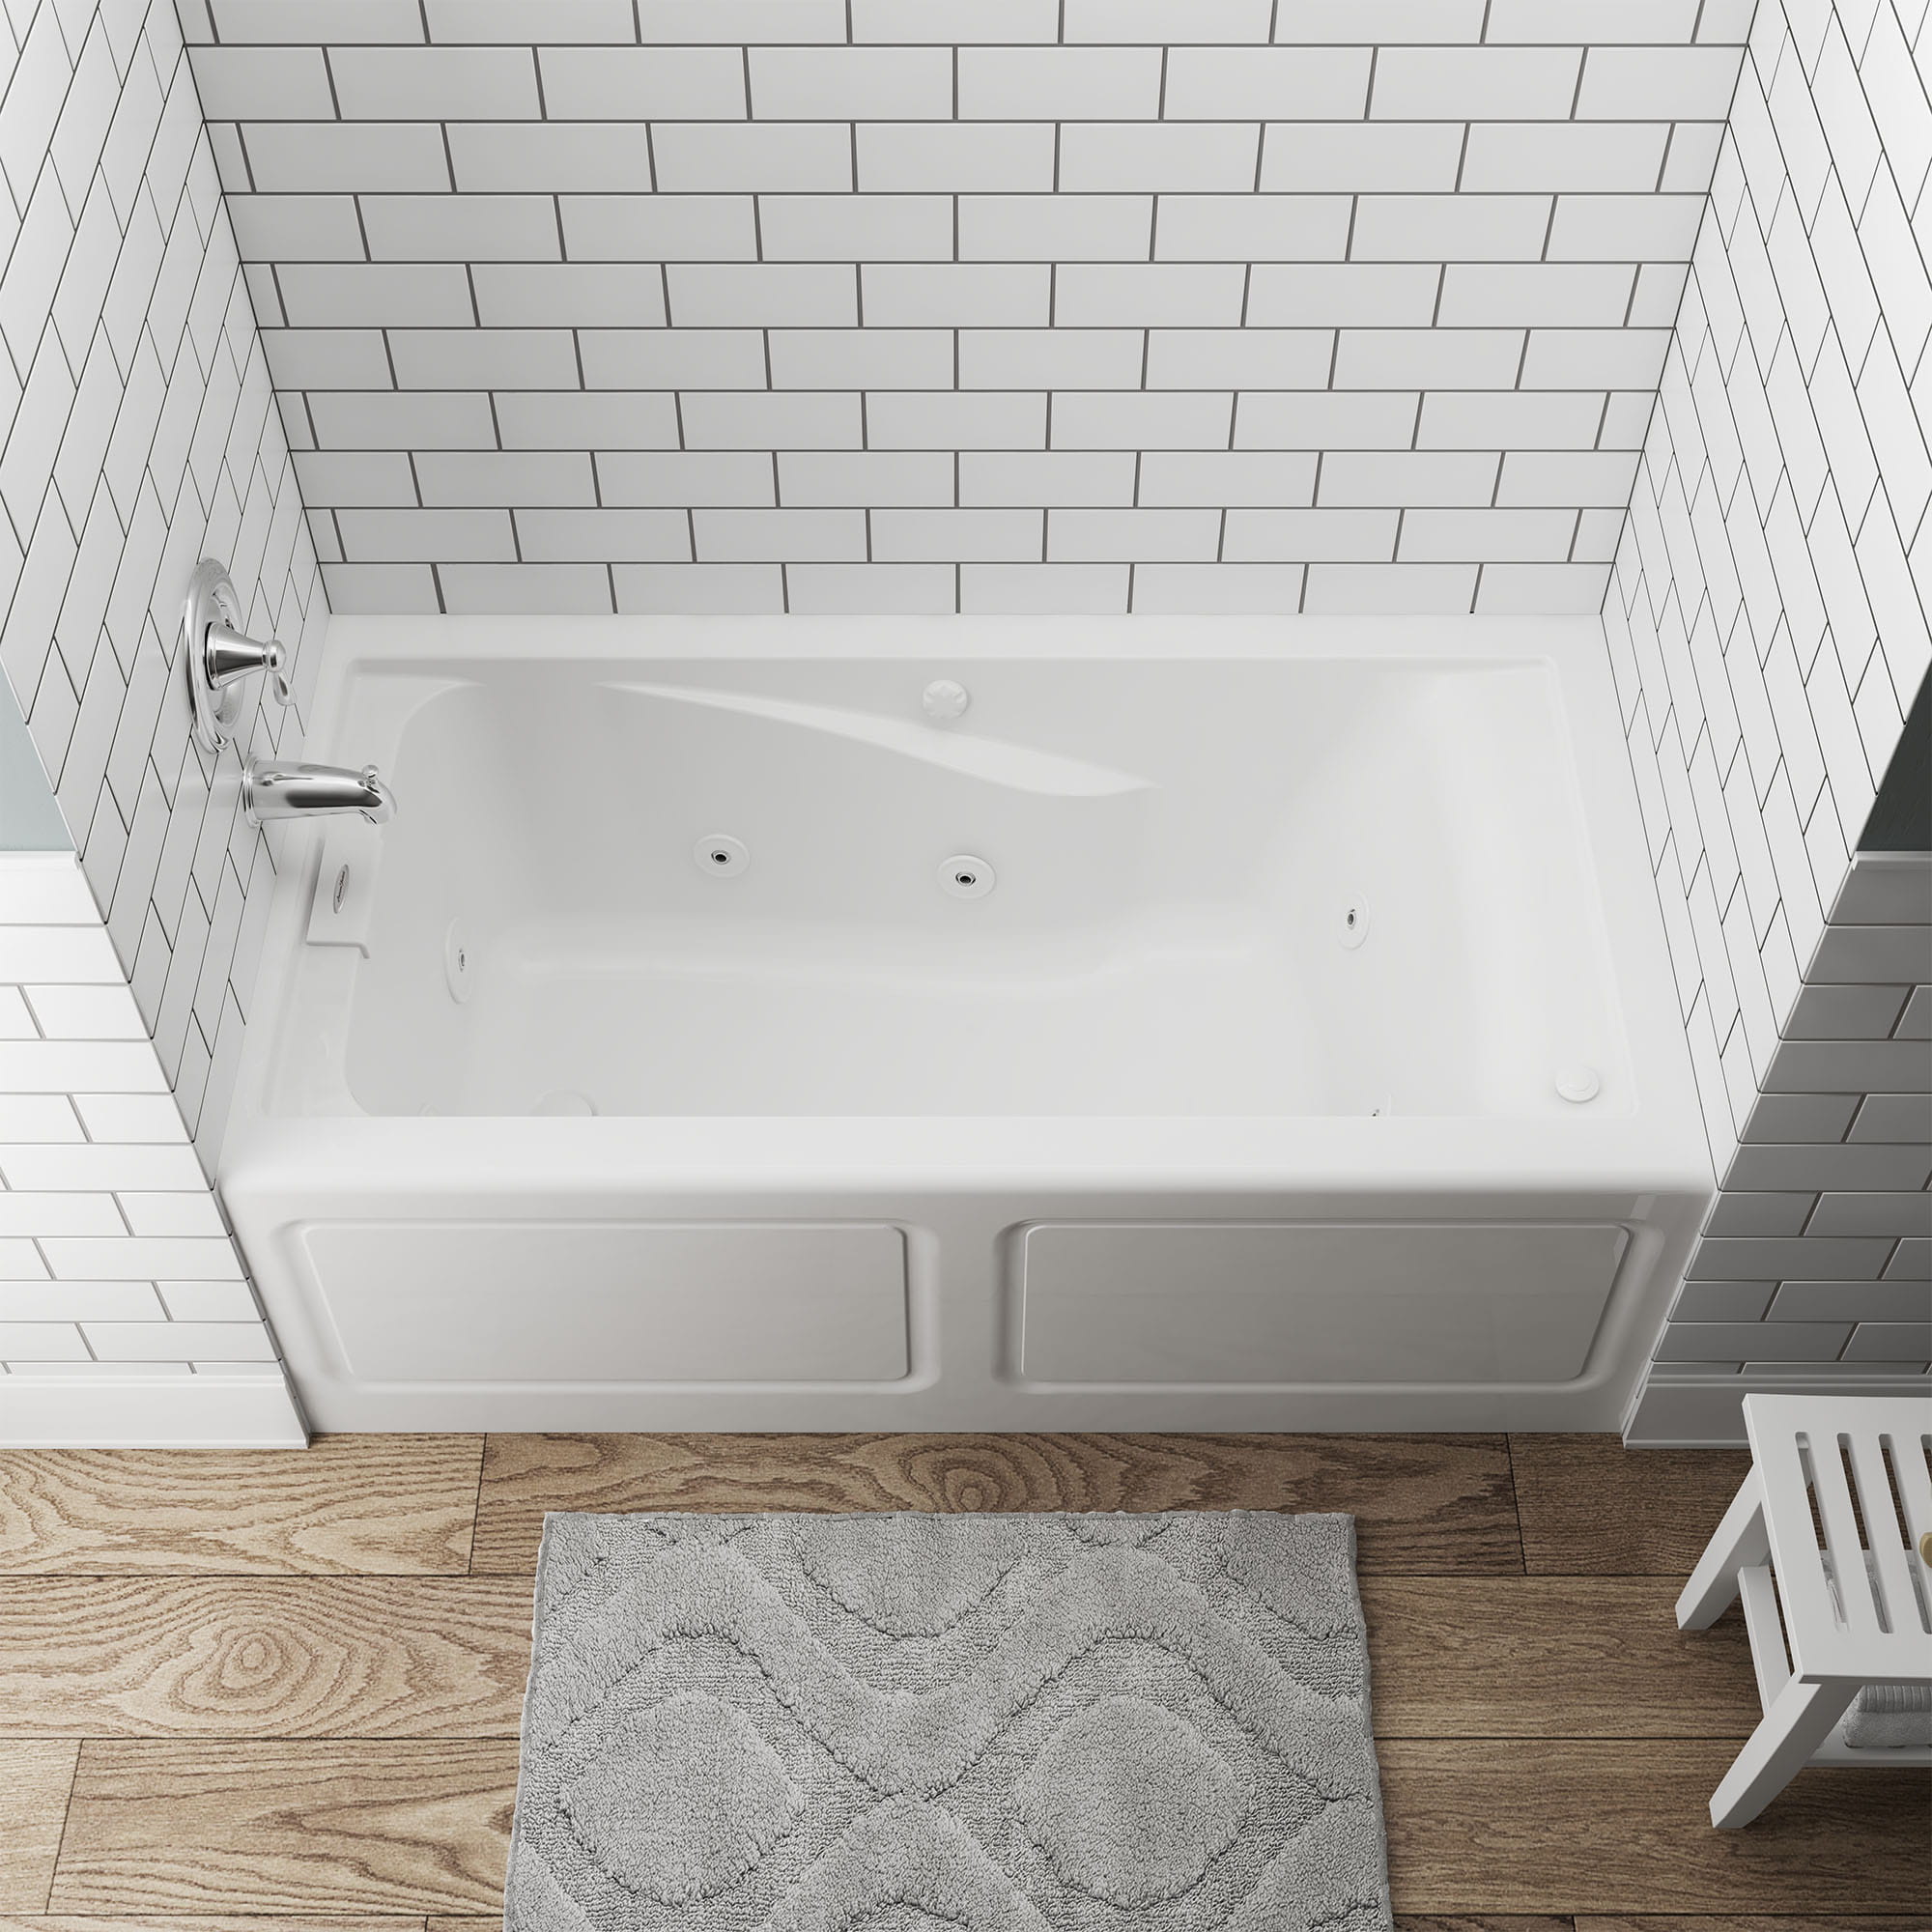 Mainstream 60in x 32in 8-Jet Whirlpool Tub with Left-Hand Drain